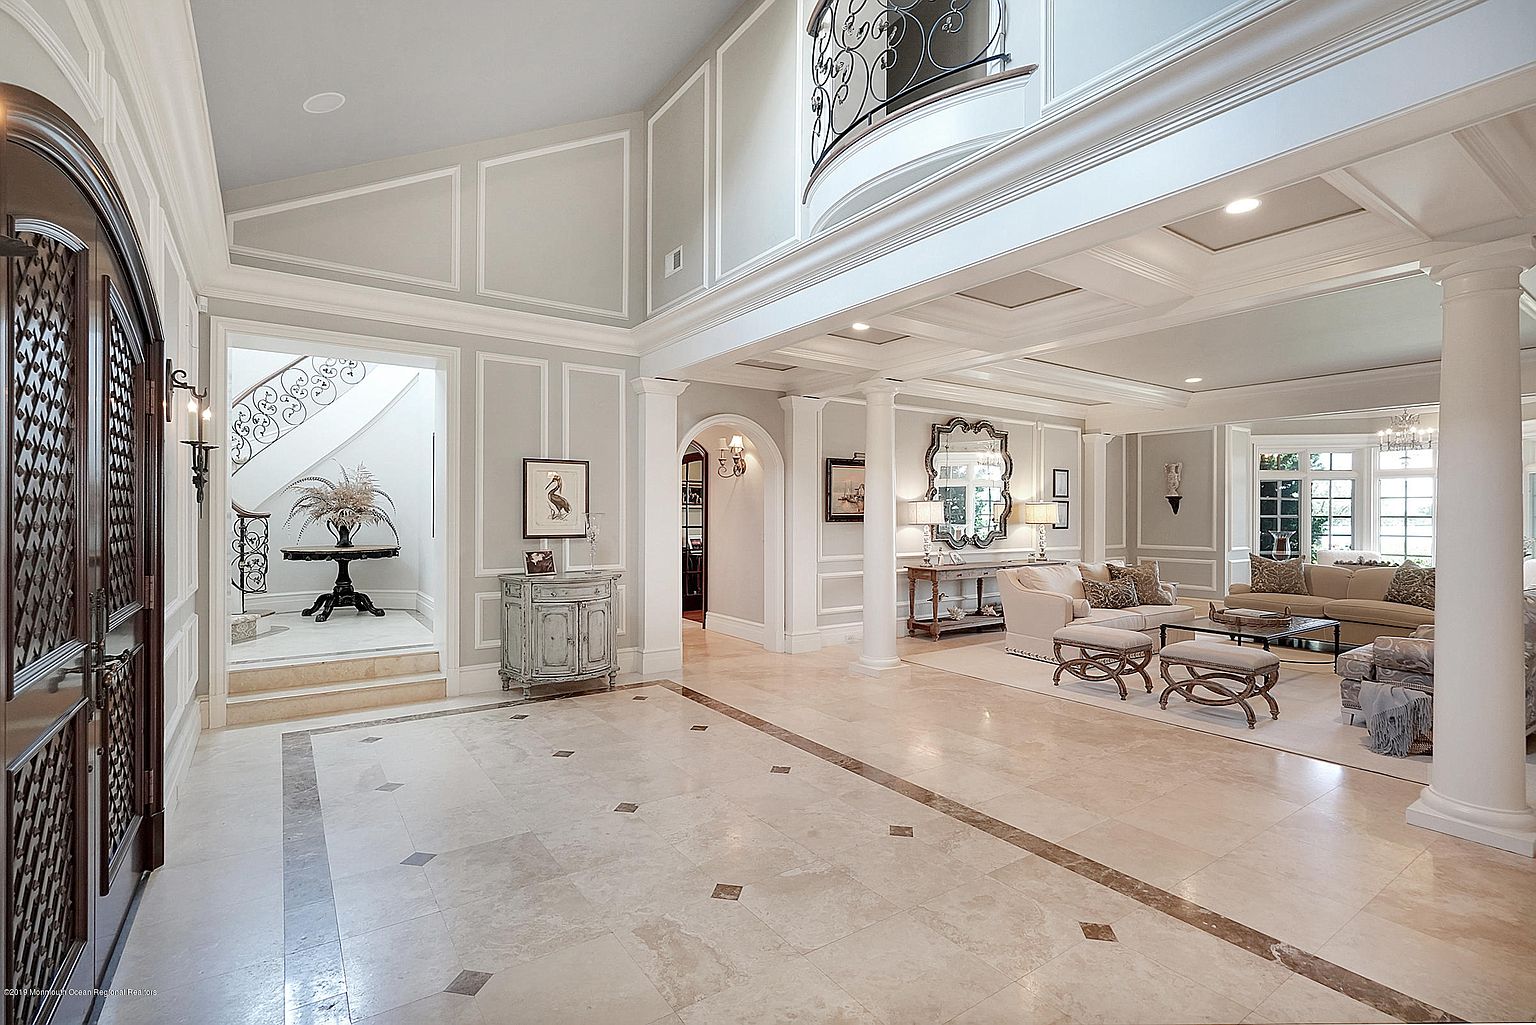 11,000 square foot european-inspired stone mansion in